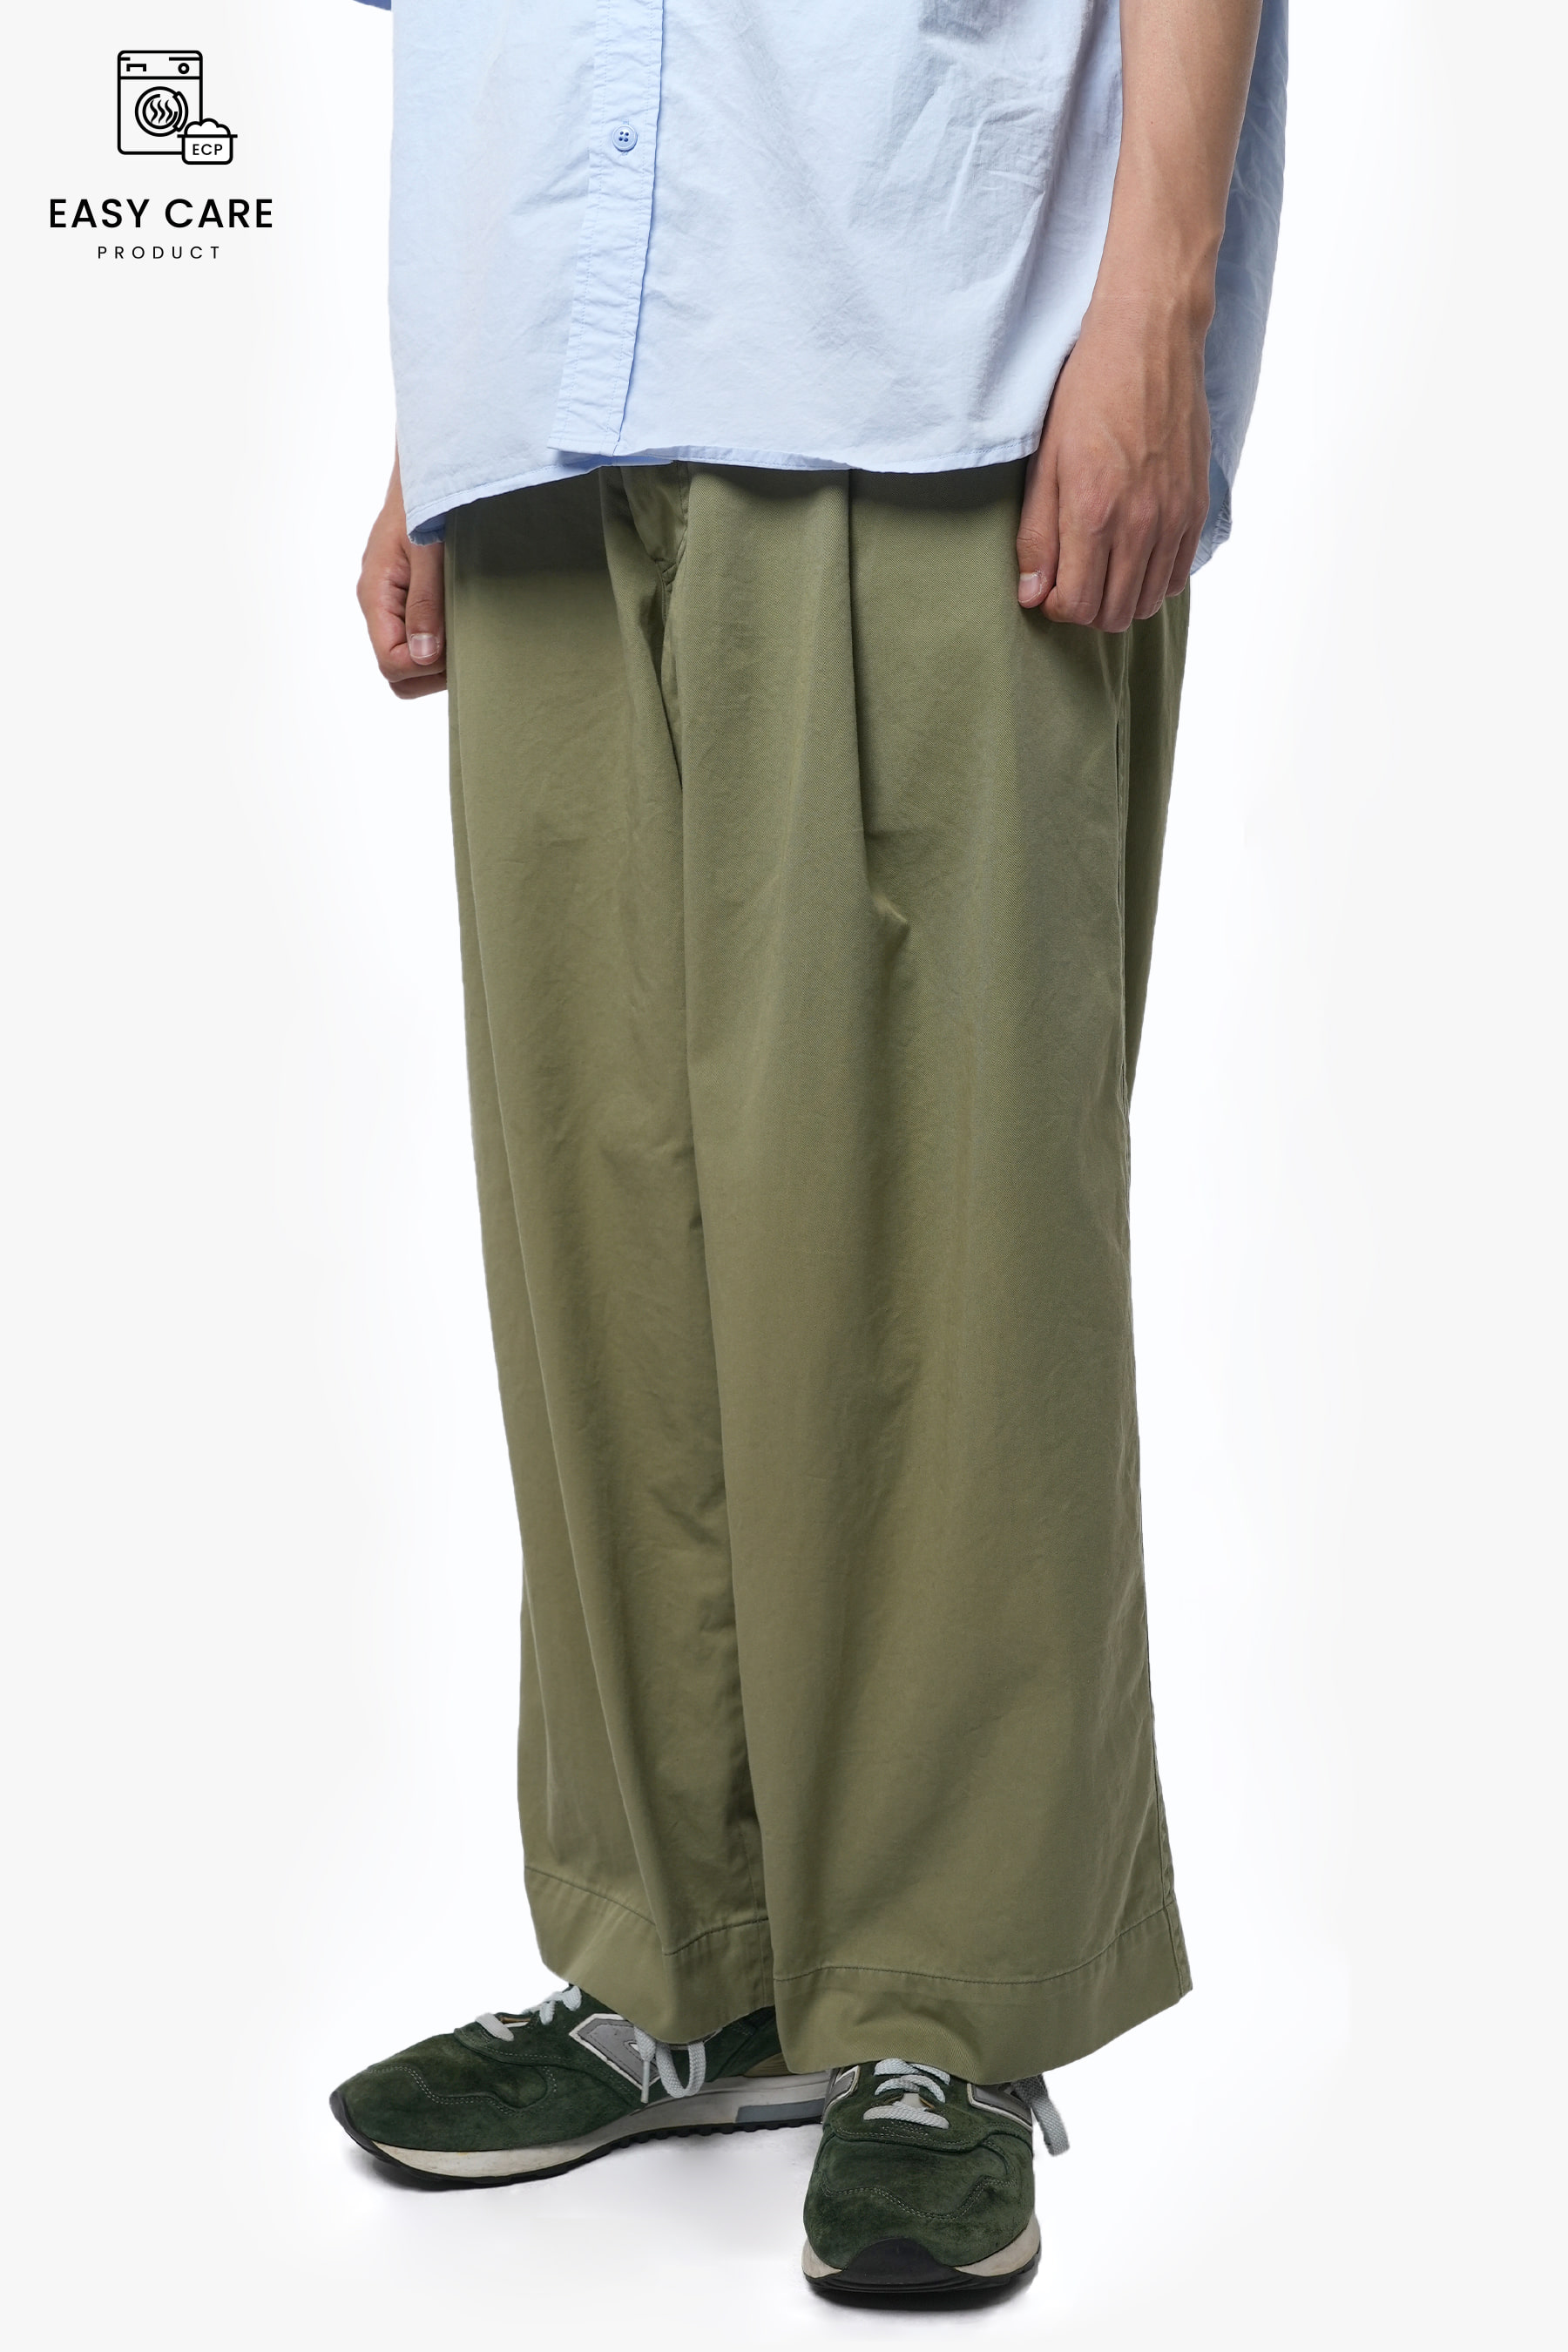 [REUSE] KHAKI ONE-TUCK WIDE WASHED CHINO PANTS (ECP GARMENT PROCESS)